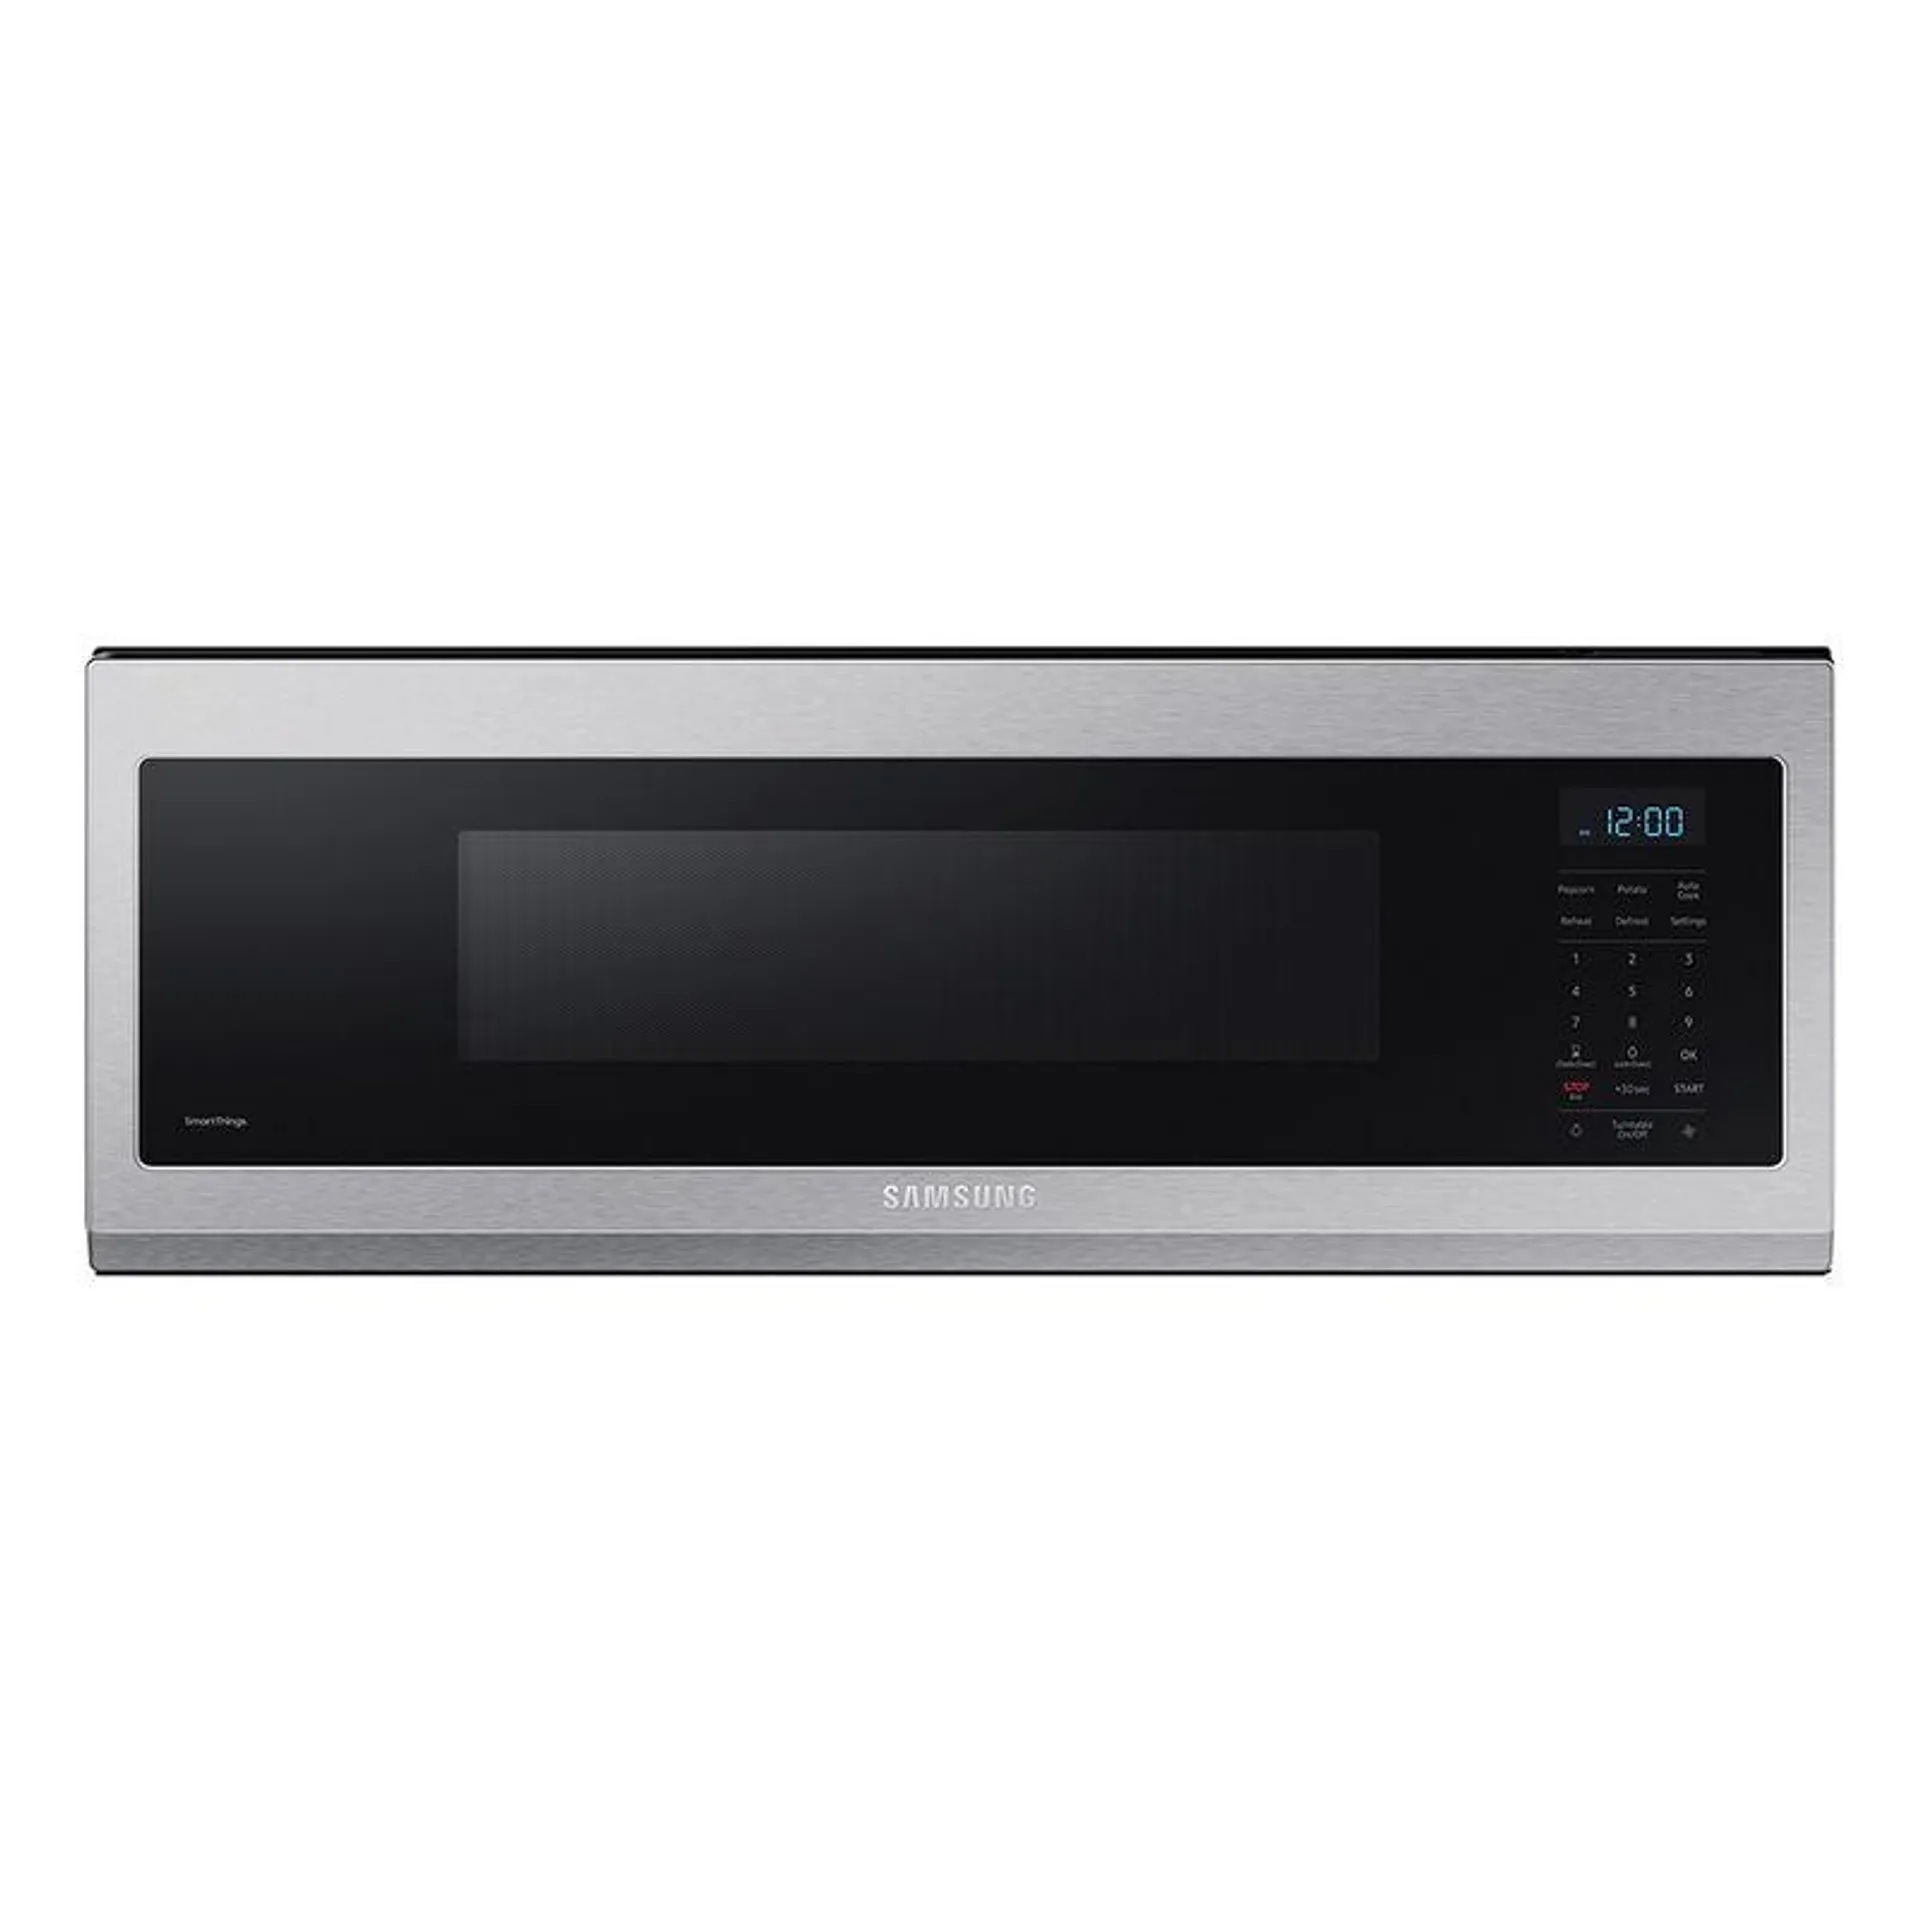 Samsung 30" 1.1 Cu. Ft. Over-the-Range Microwave with 10 Power Levels & 400 CFM - Stainless Steel